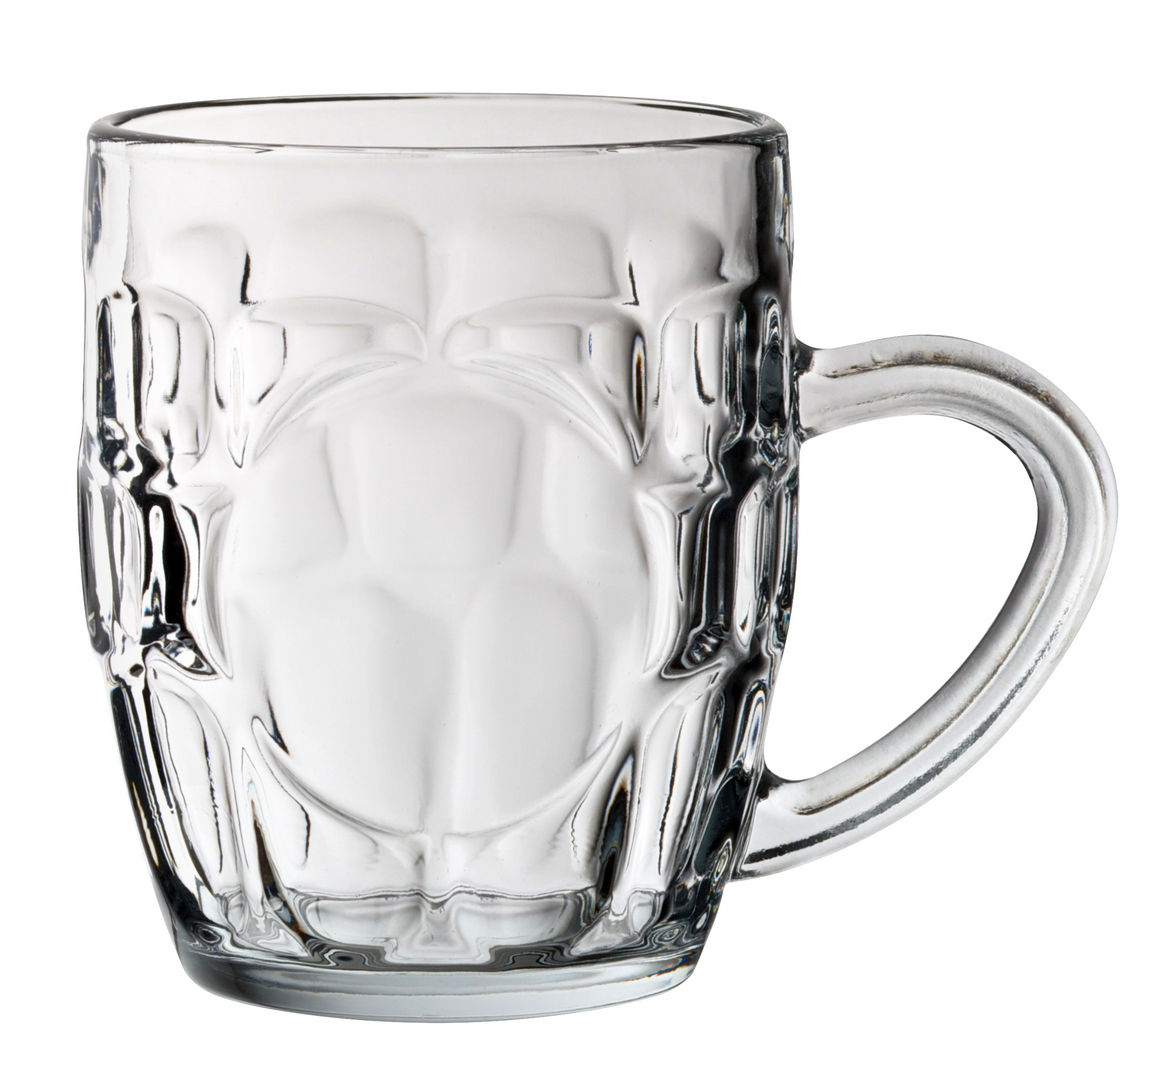 Dimple Tankard Panelled 10oz (29cl) CE - P00013-CE0000-B01036 (Pack of 36)